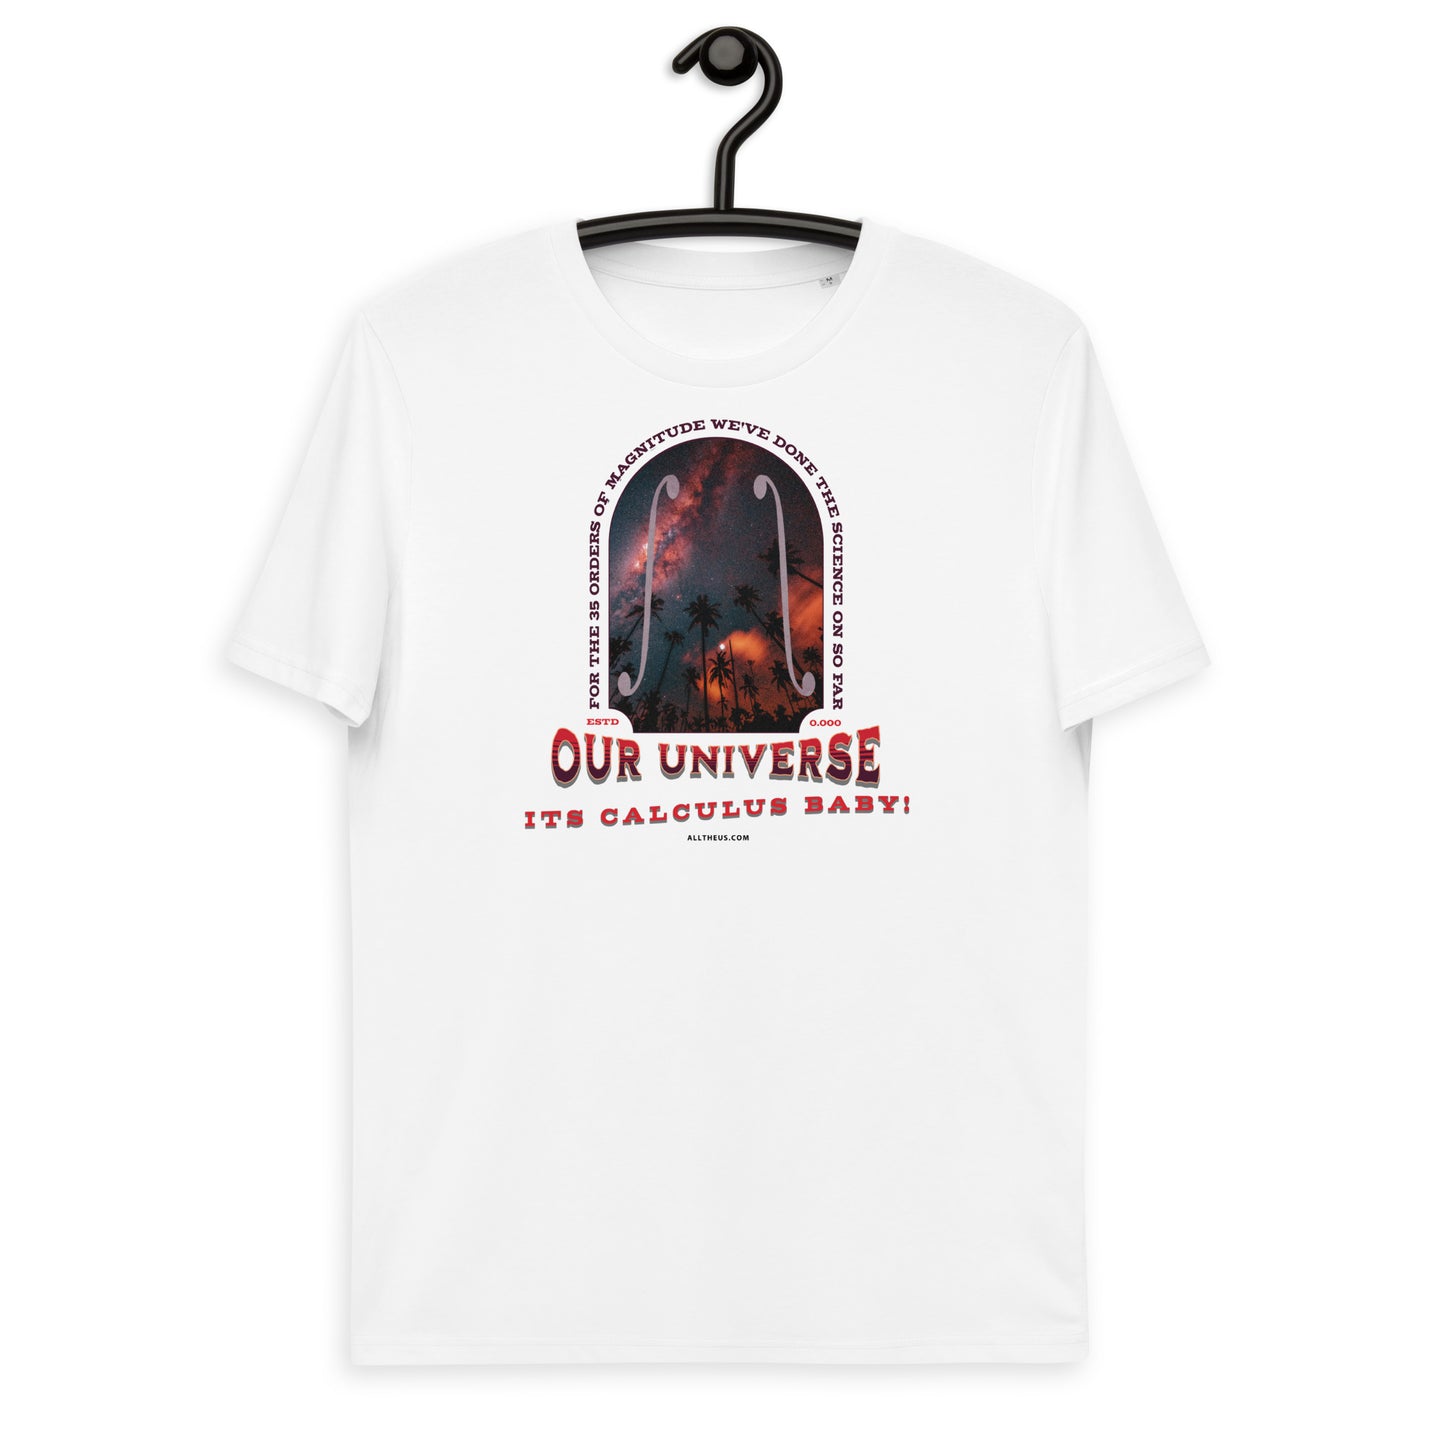 Unisex organic cotton t-shirt - Our Red Shifted Universe, Its Calculus Baby!